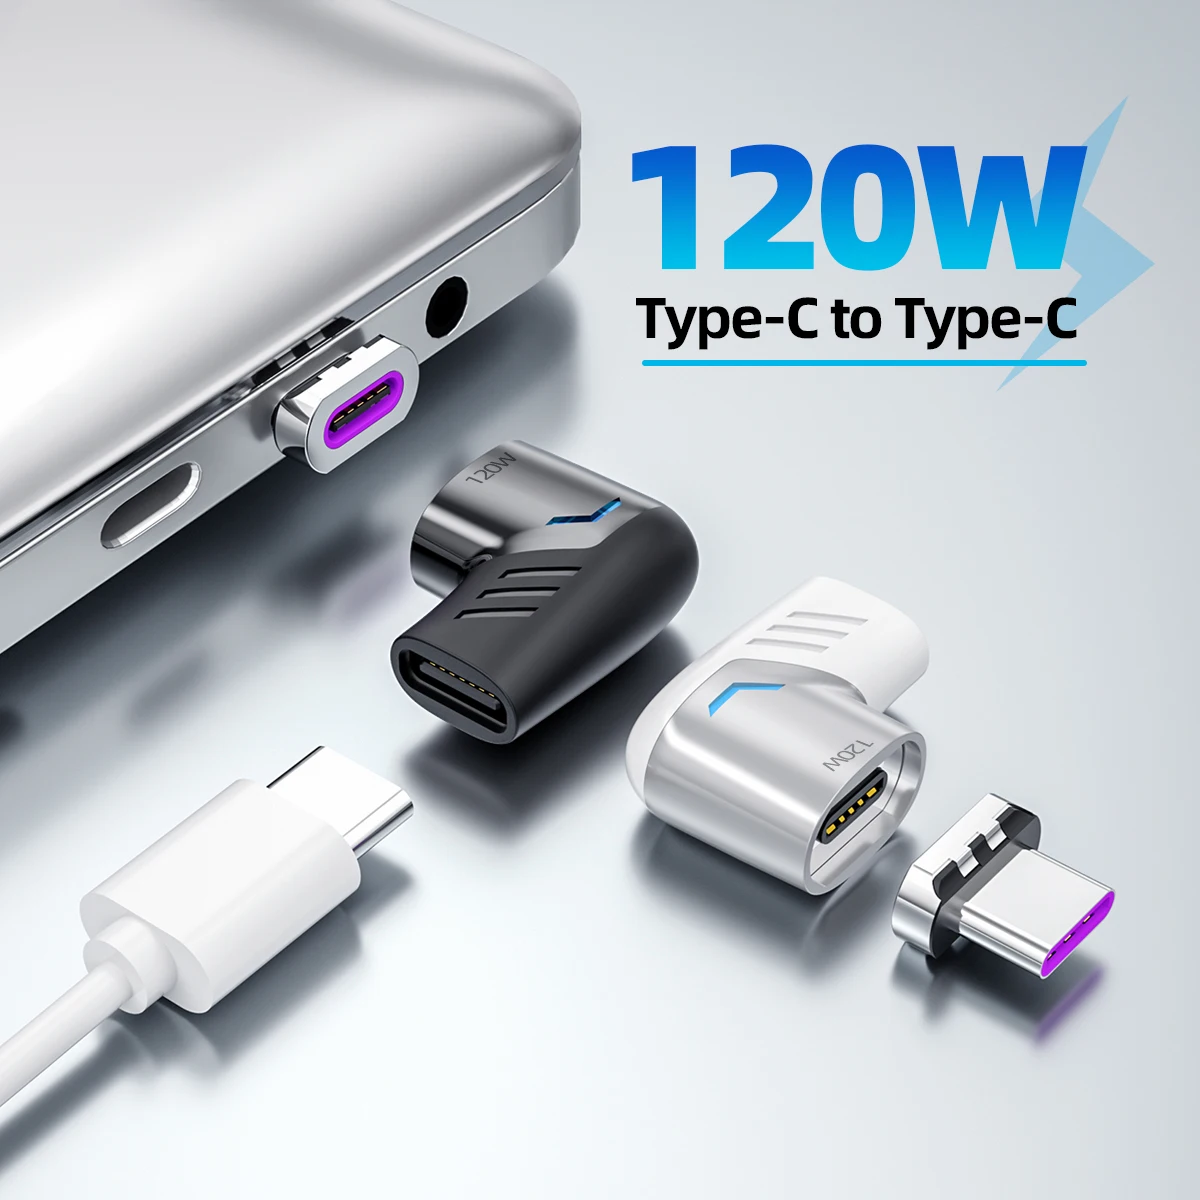 

Fast Charging 120W/6A Max Magnetic Type C Charger Adapter for Macbook Magnet Cable Converter USB Cable Connector